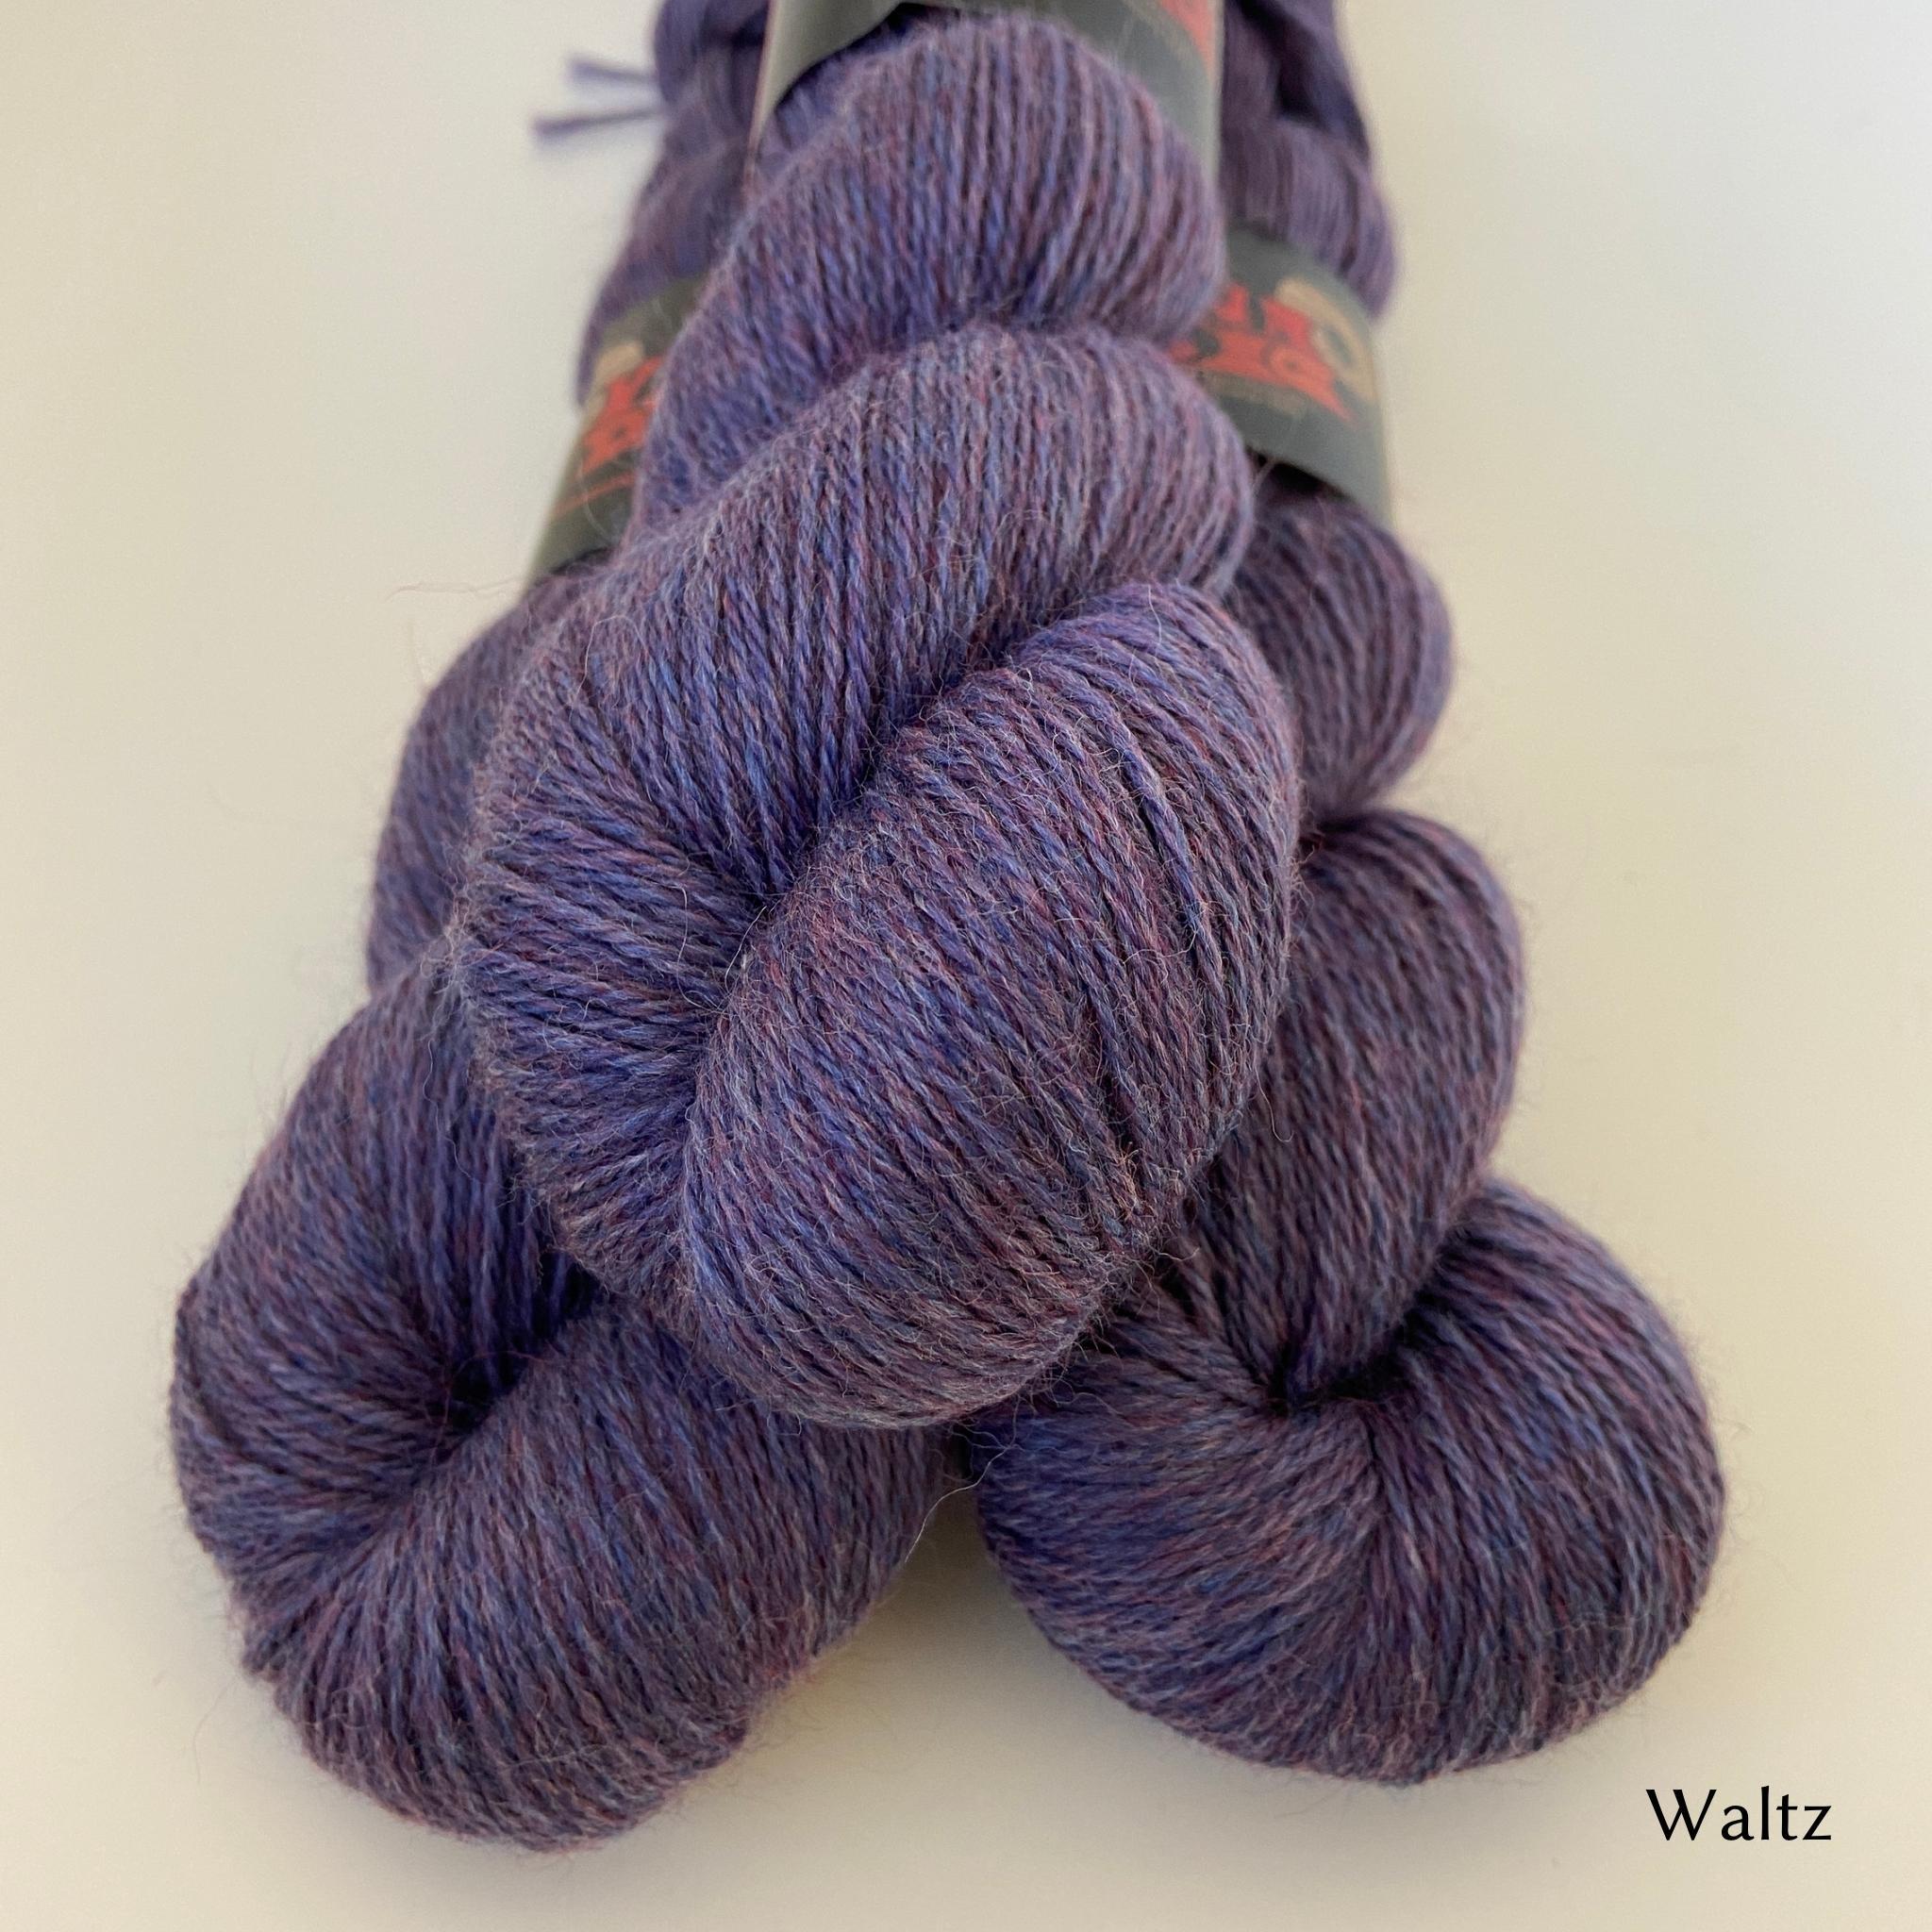 Aiming for Drape: How to Choose Yarns for Drapey Fabric – The Woolly Thistle